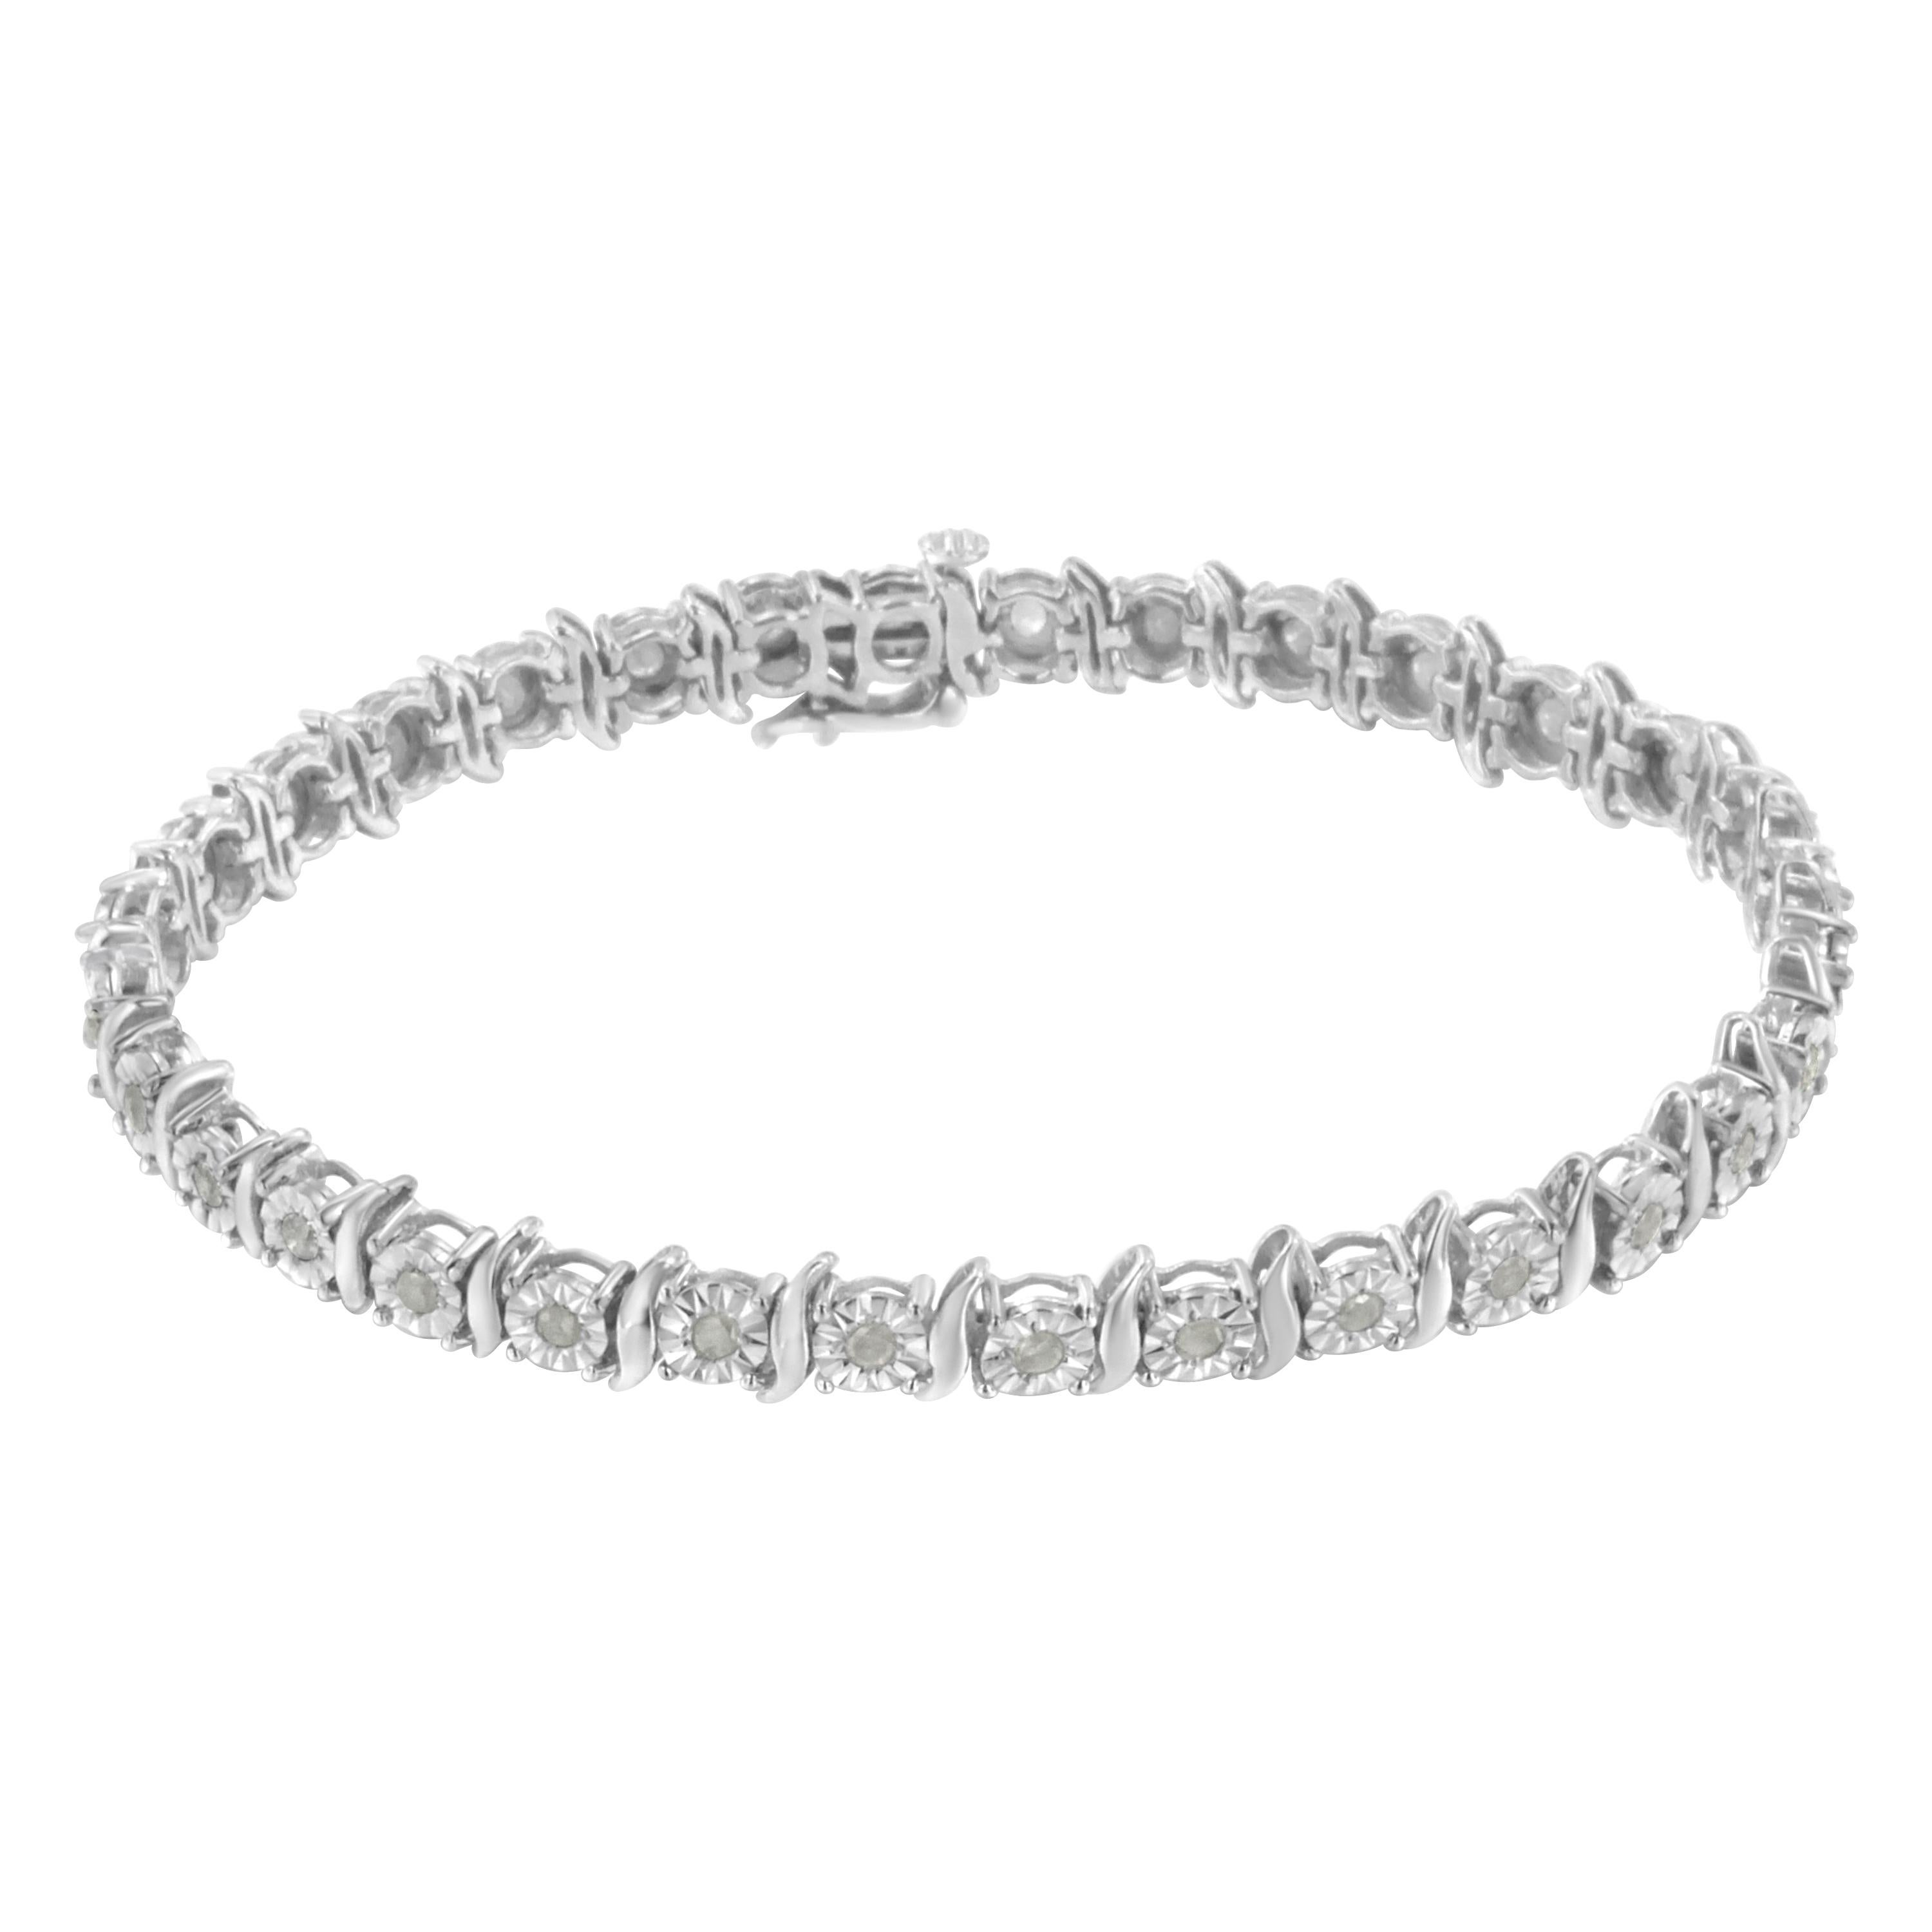 Feminine yet glamorous, this bracelet shines! The curvy settings spiral around each beautiful rose cut diamond for a unique and elegant gift she'll remember forever. In your choice of polished sterling silver setting plated with tarnish-free